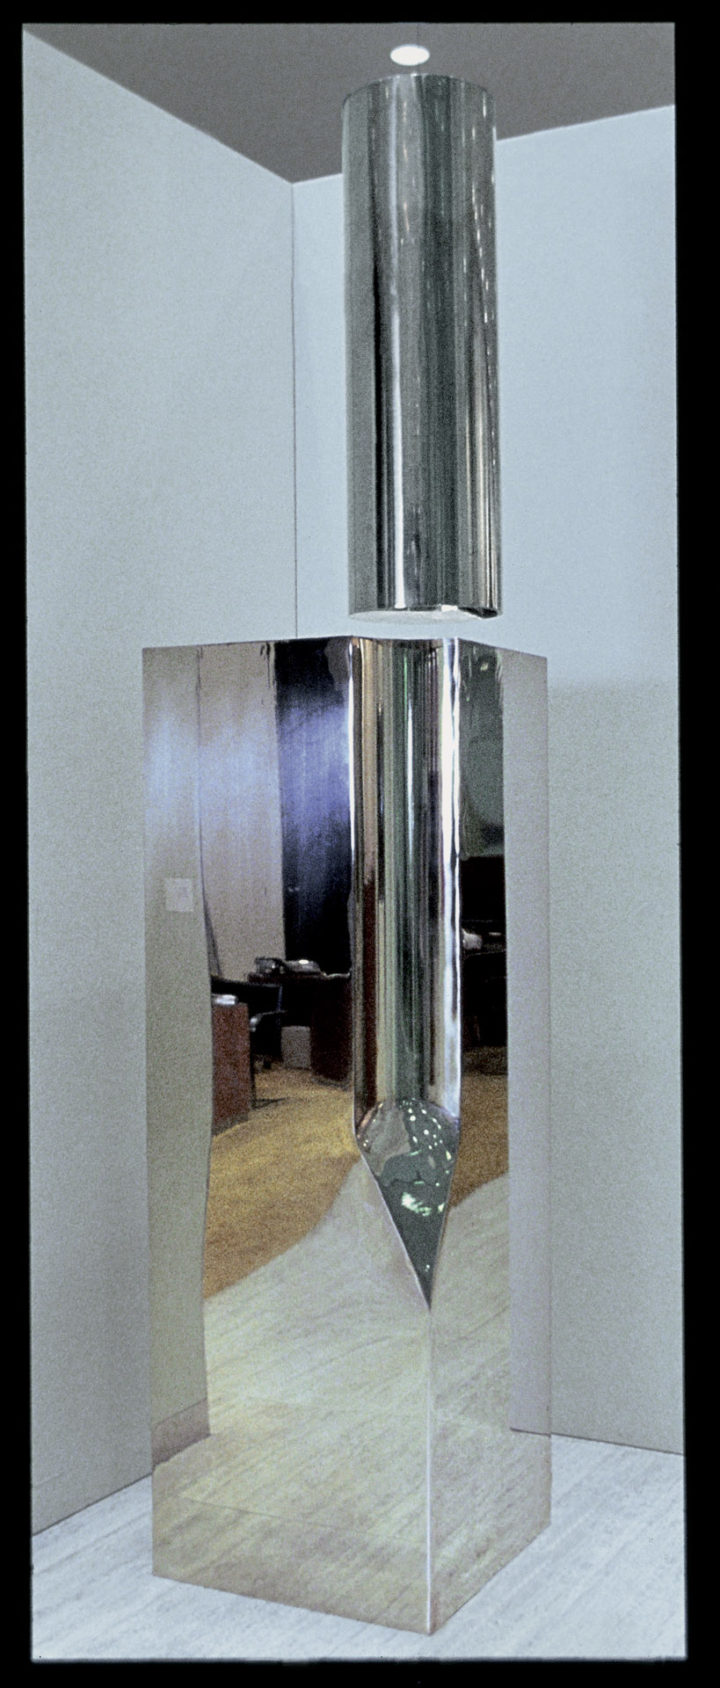 Concave – Convex, 1977, bronze, 183 x 61 x 61 cm.
Collection of George Hlepas, Chicago, IL, USA